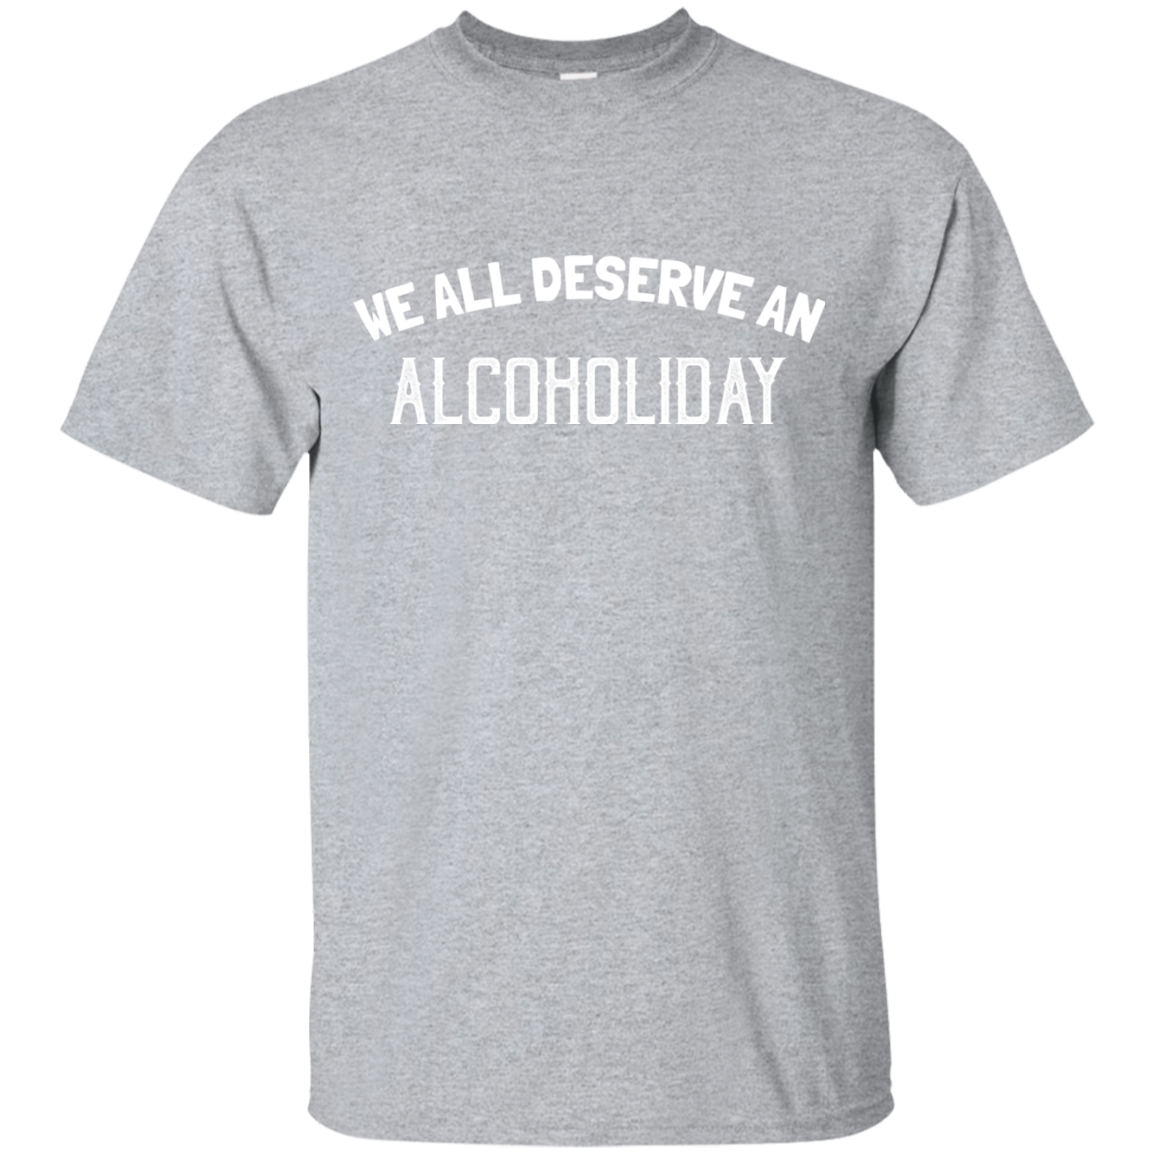 We All Deserve An Alcoholiday T-Shirt Apparel - The Beer Lodge